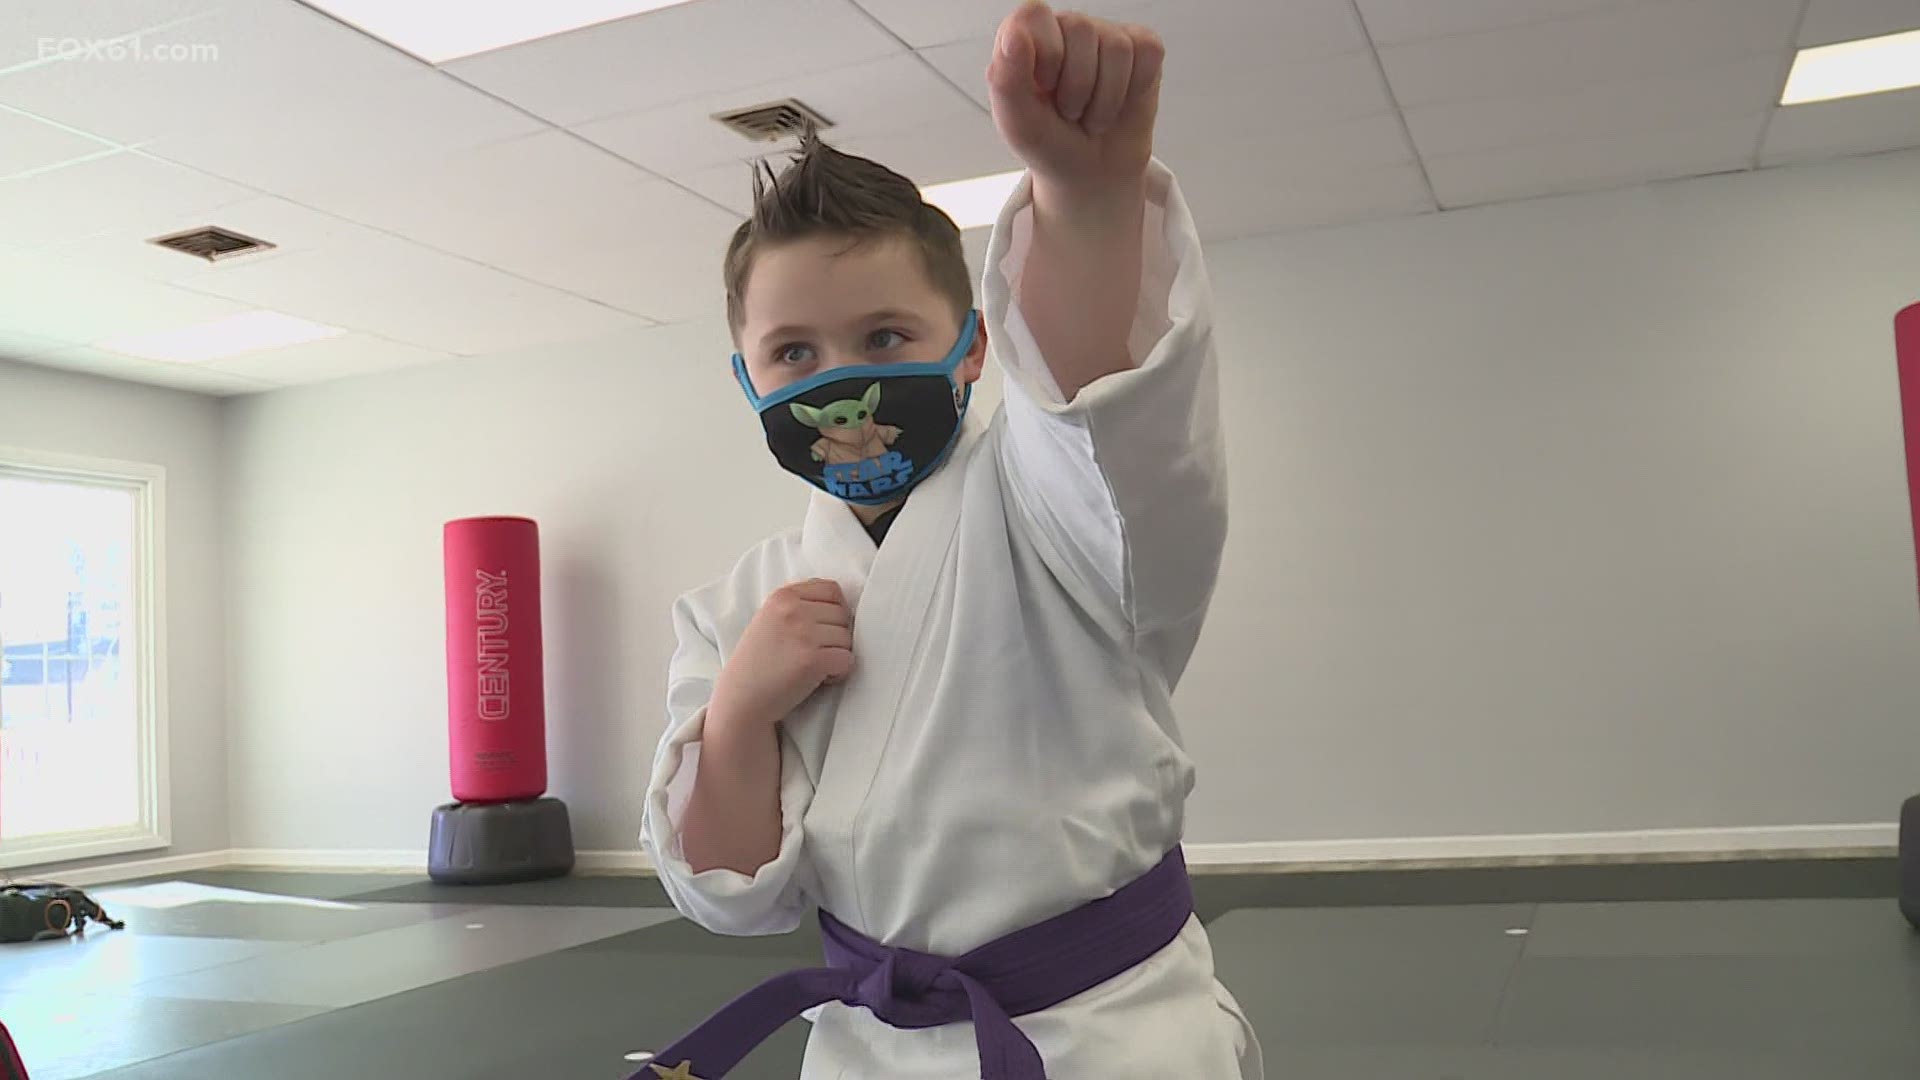 At Impact Martial Arts, 7-year-old Jess Bond is learning karate in a brand new dojo from instructors he loves.